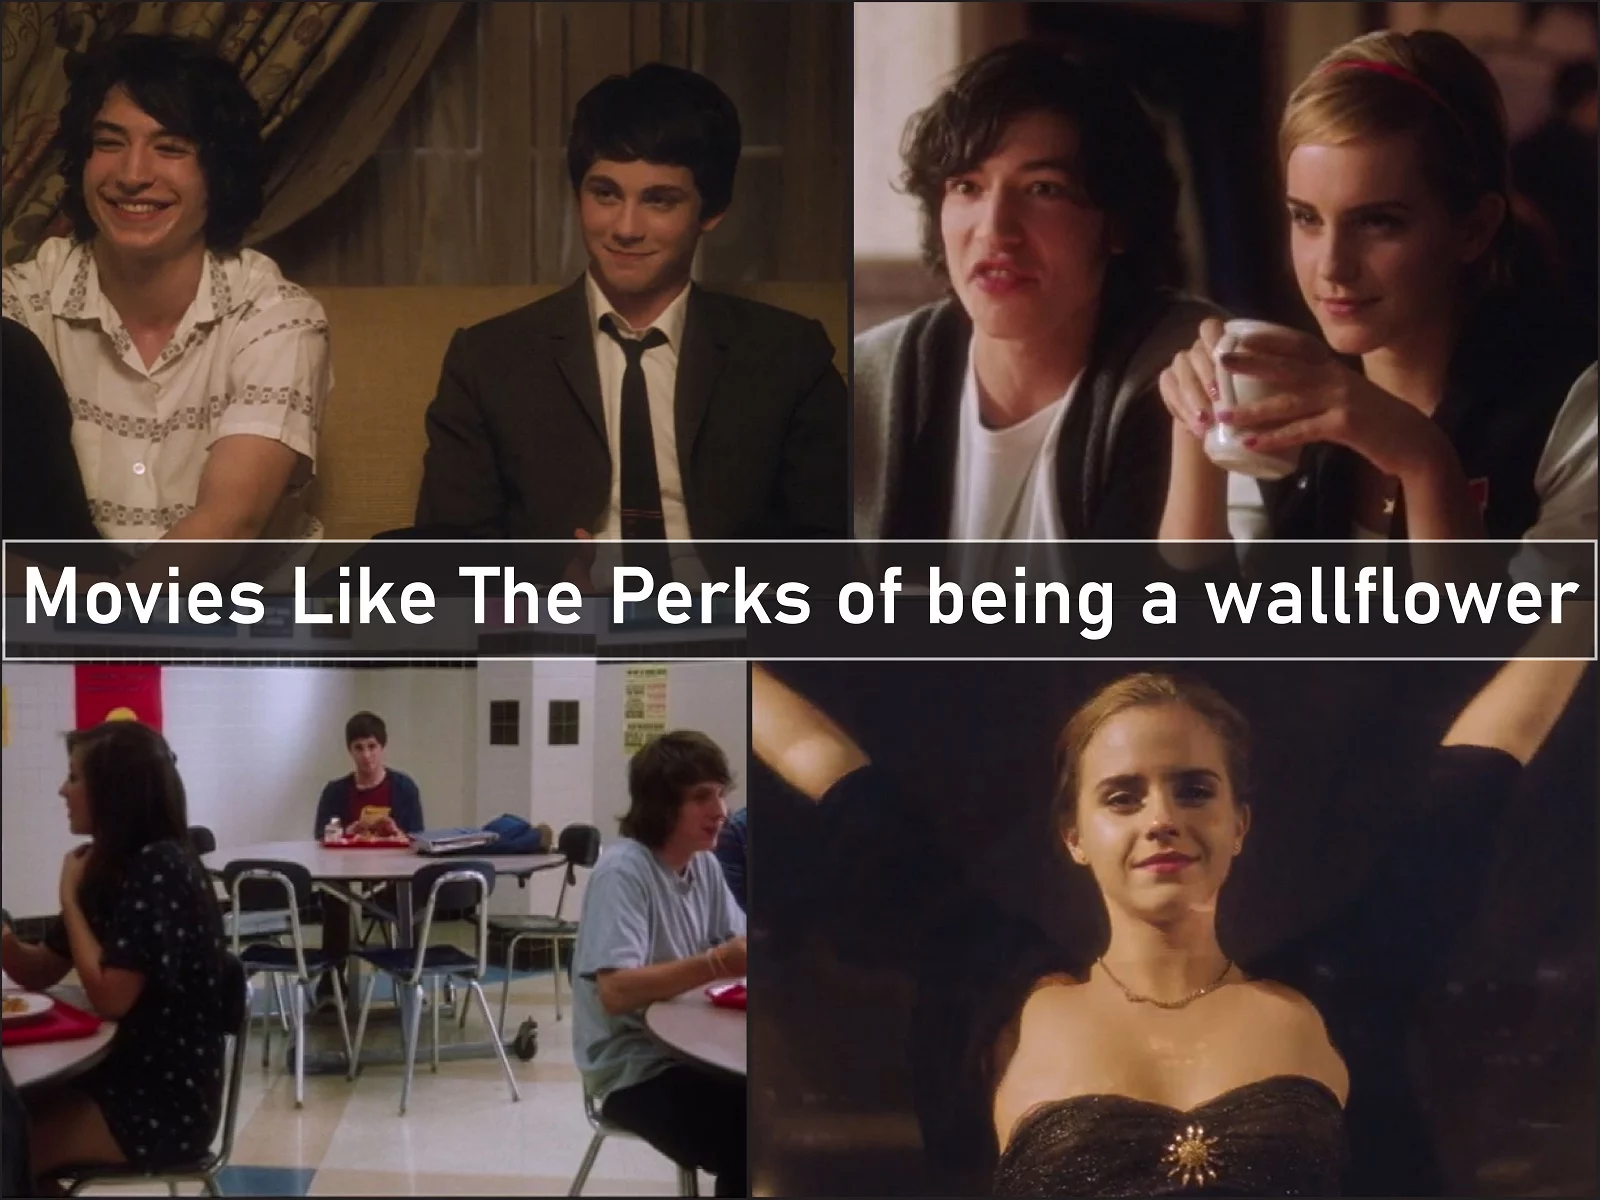 Movies Like the perks of being a wallflower